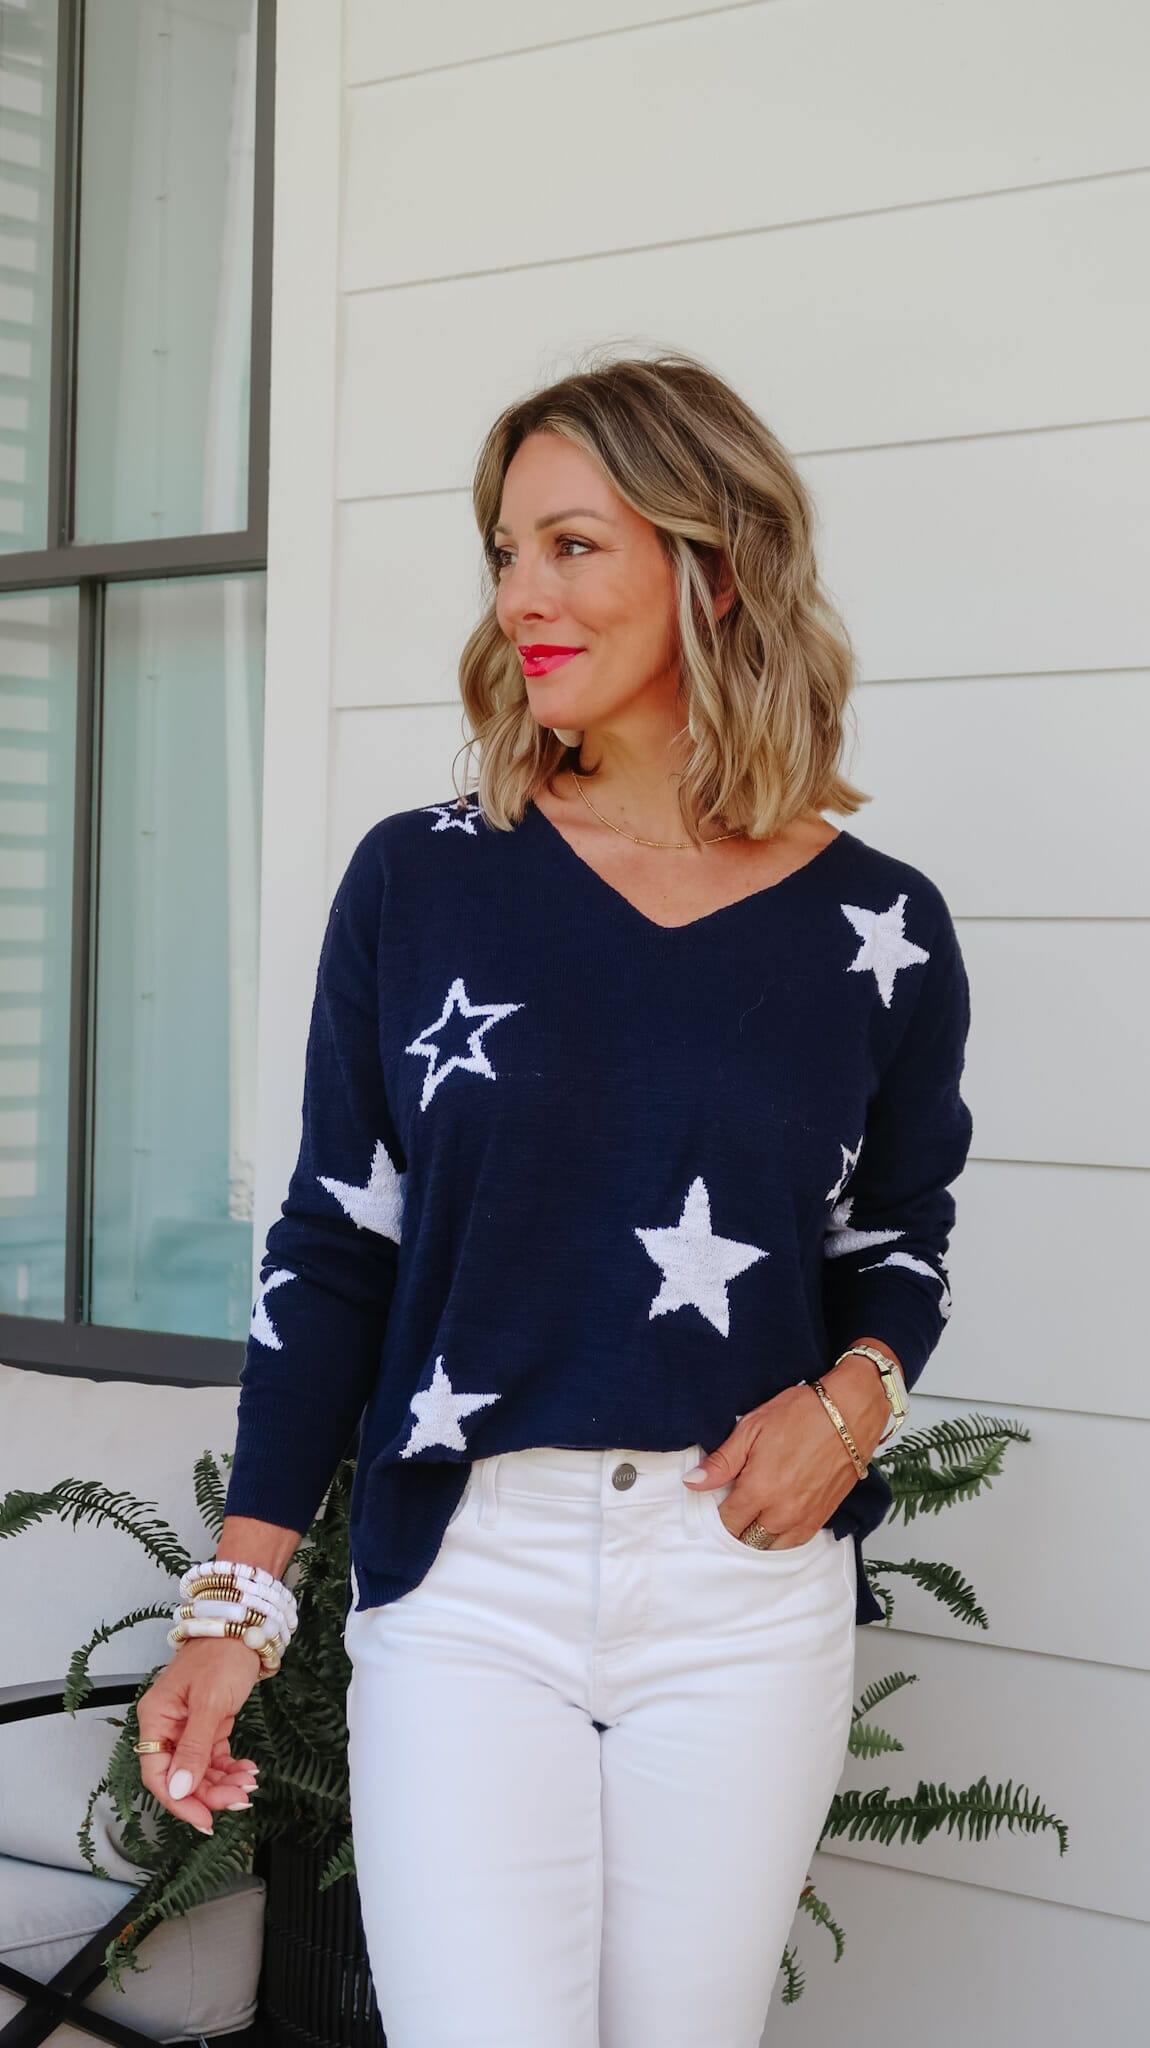 4th of July Outfits from Amazon & More (Plus My New Short Hair)